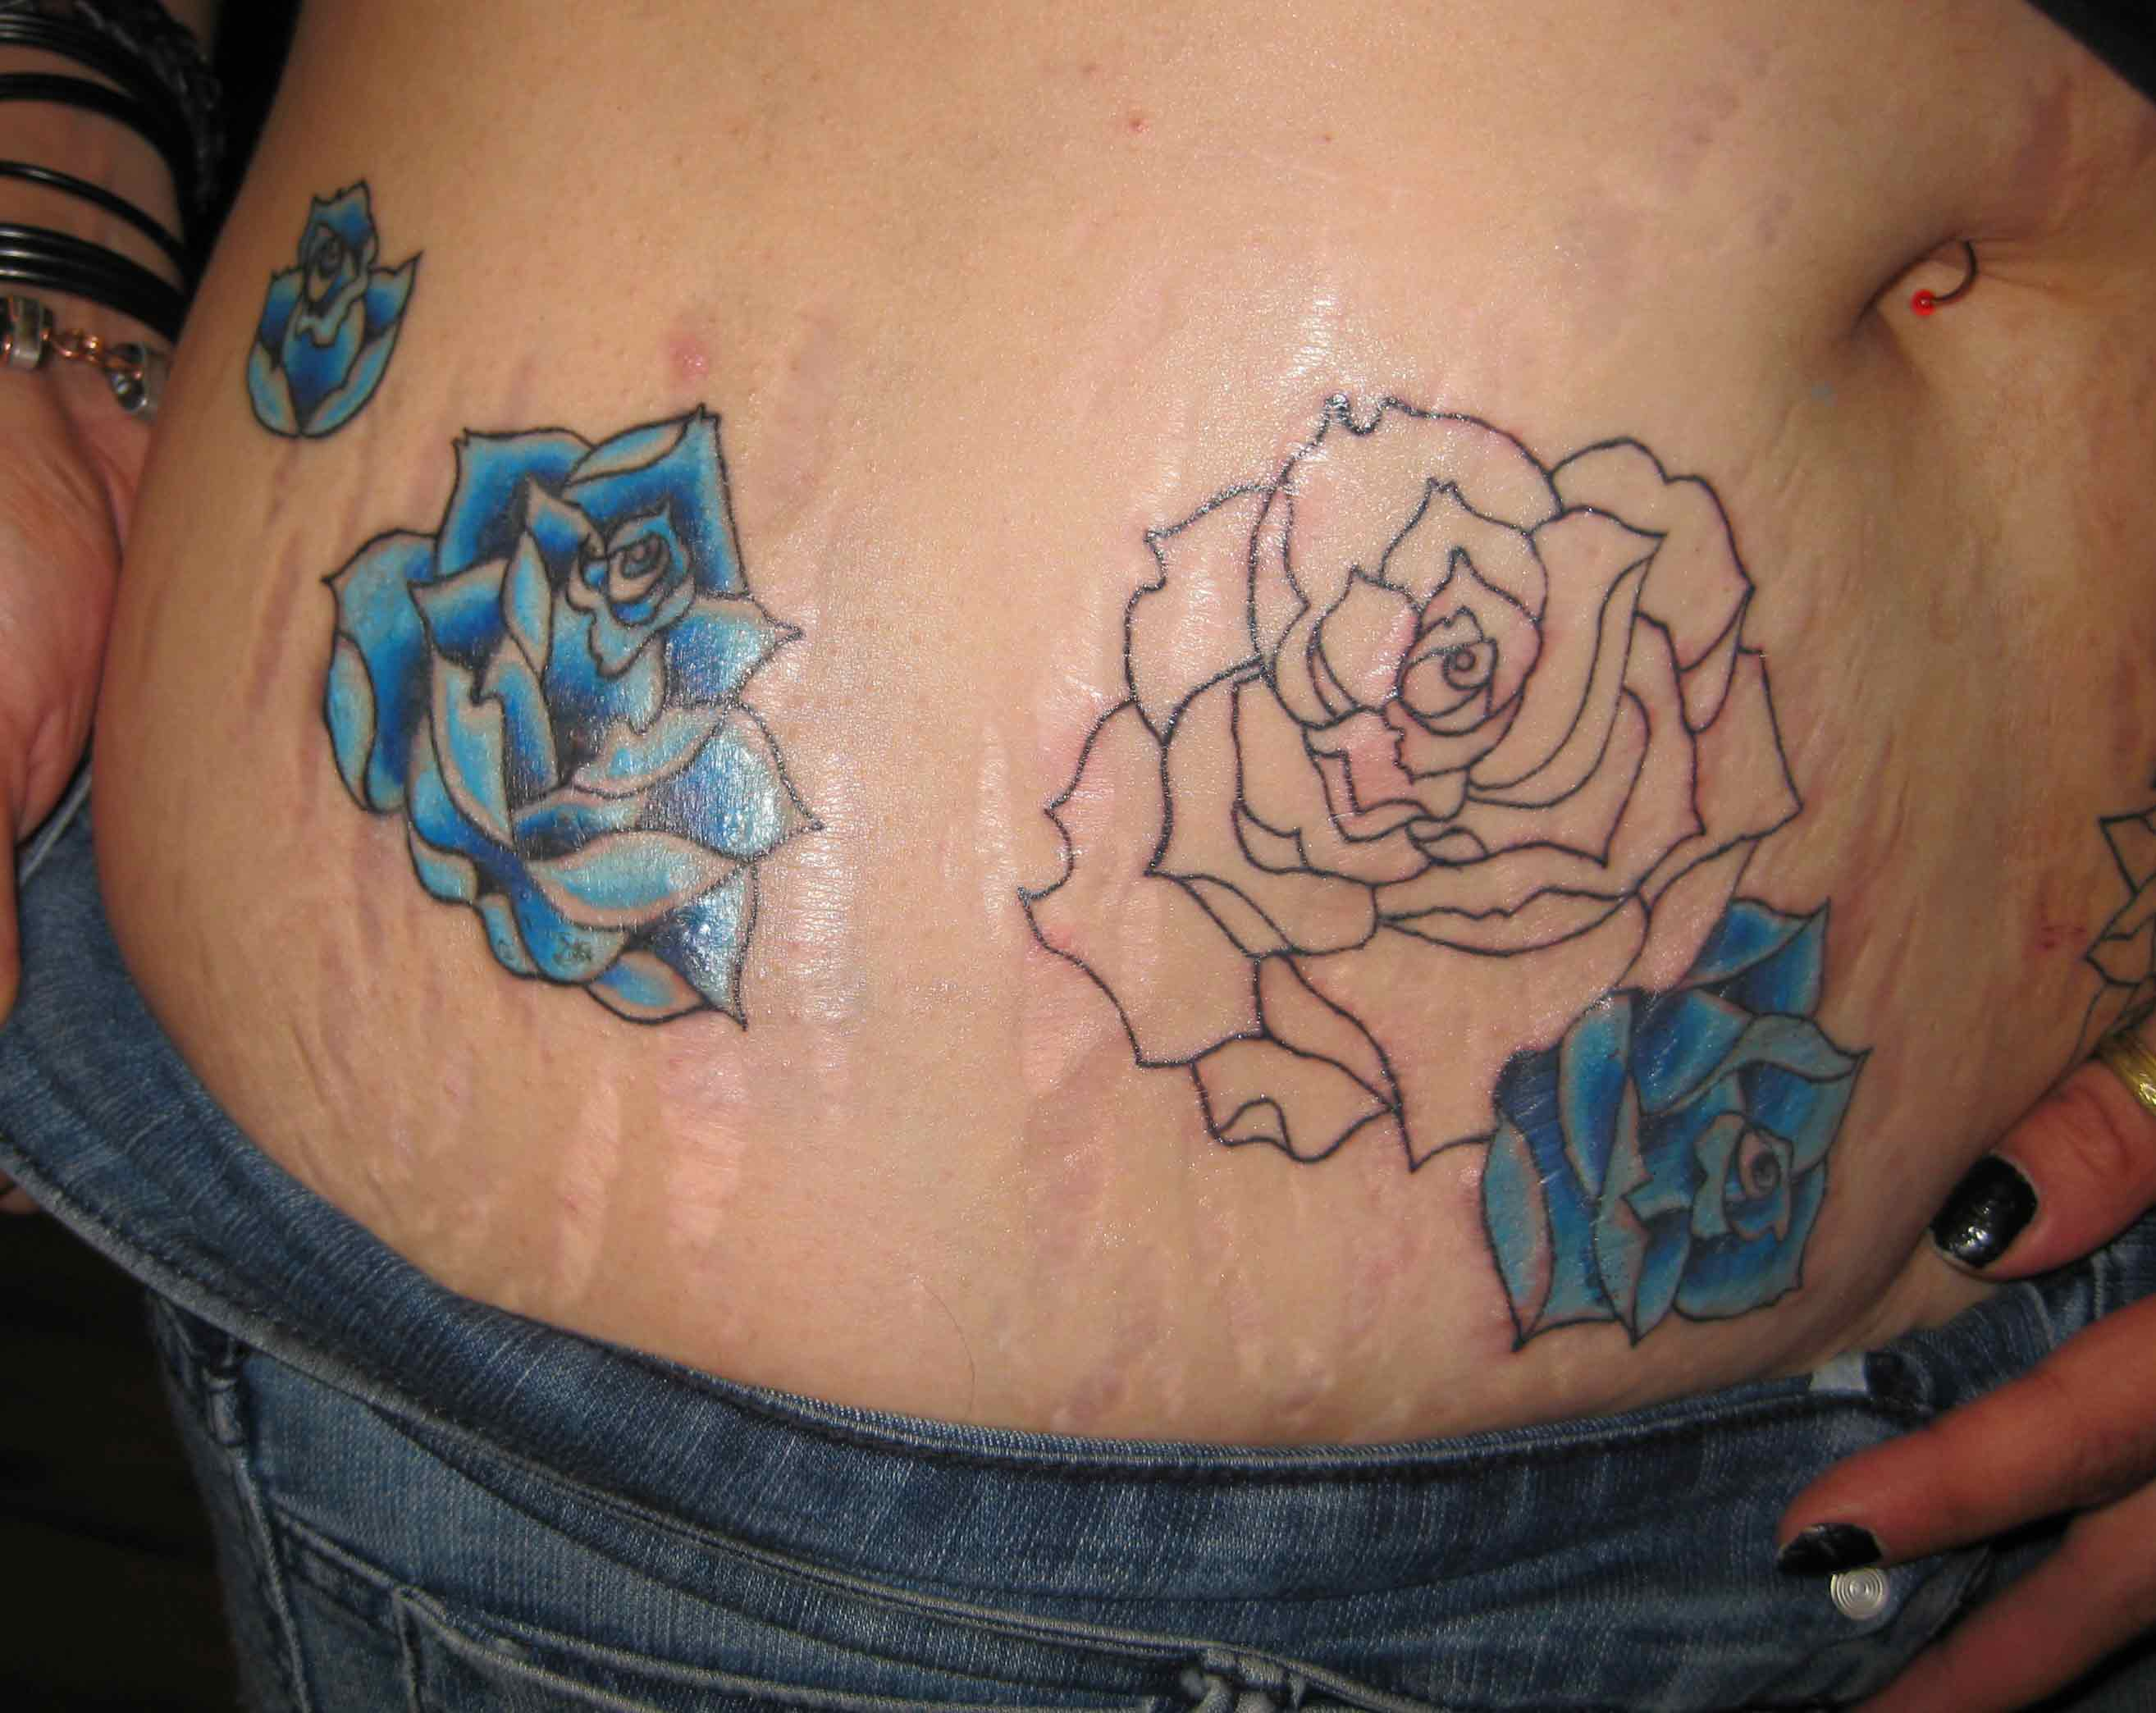 Stretch Marks General Tattoo Discussion Ink Trails Tattoo Forum with size 2...